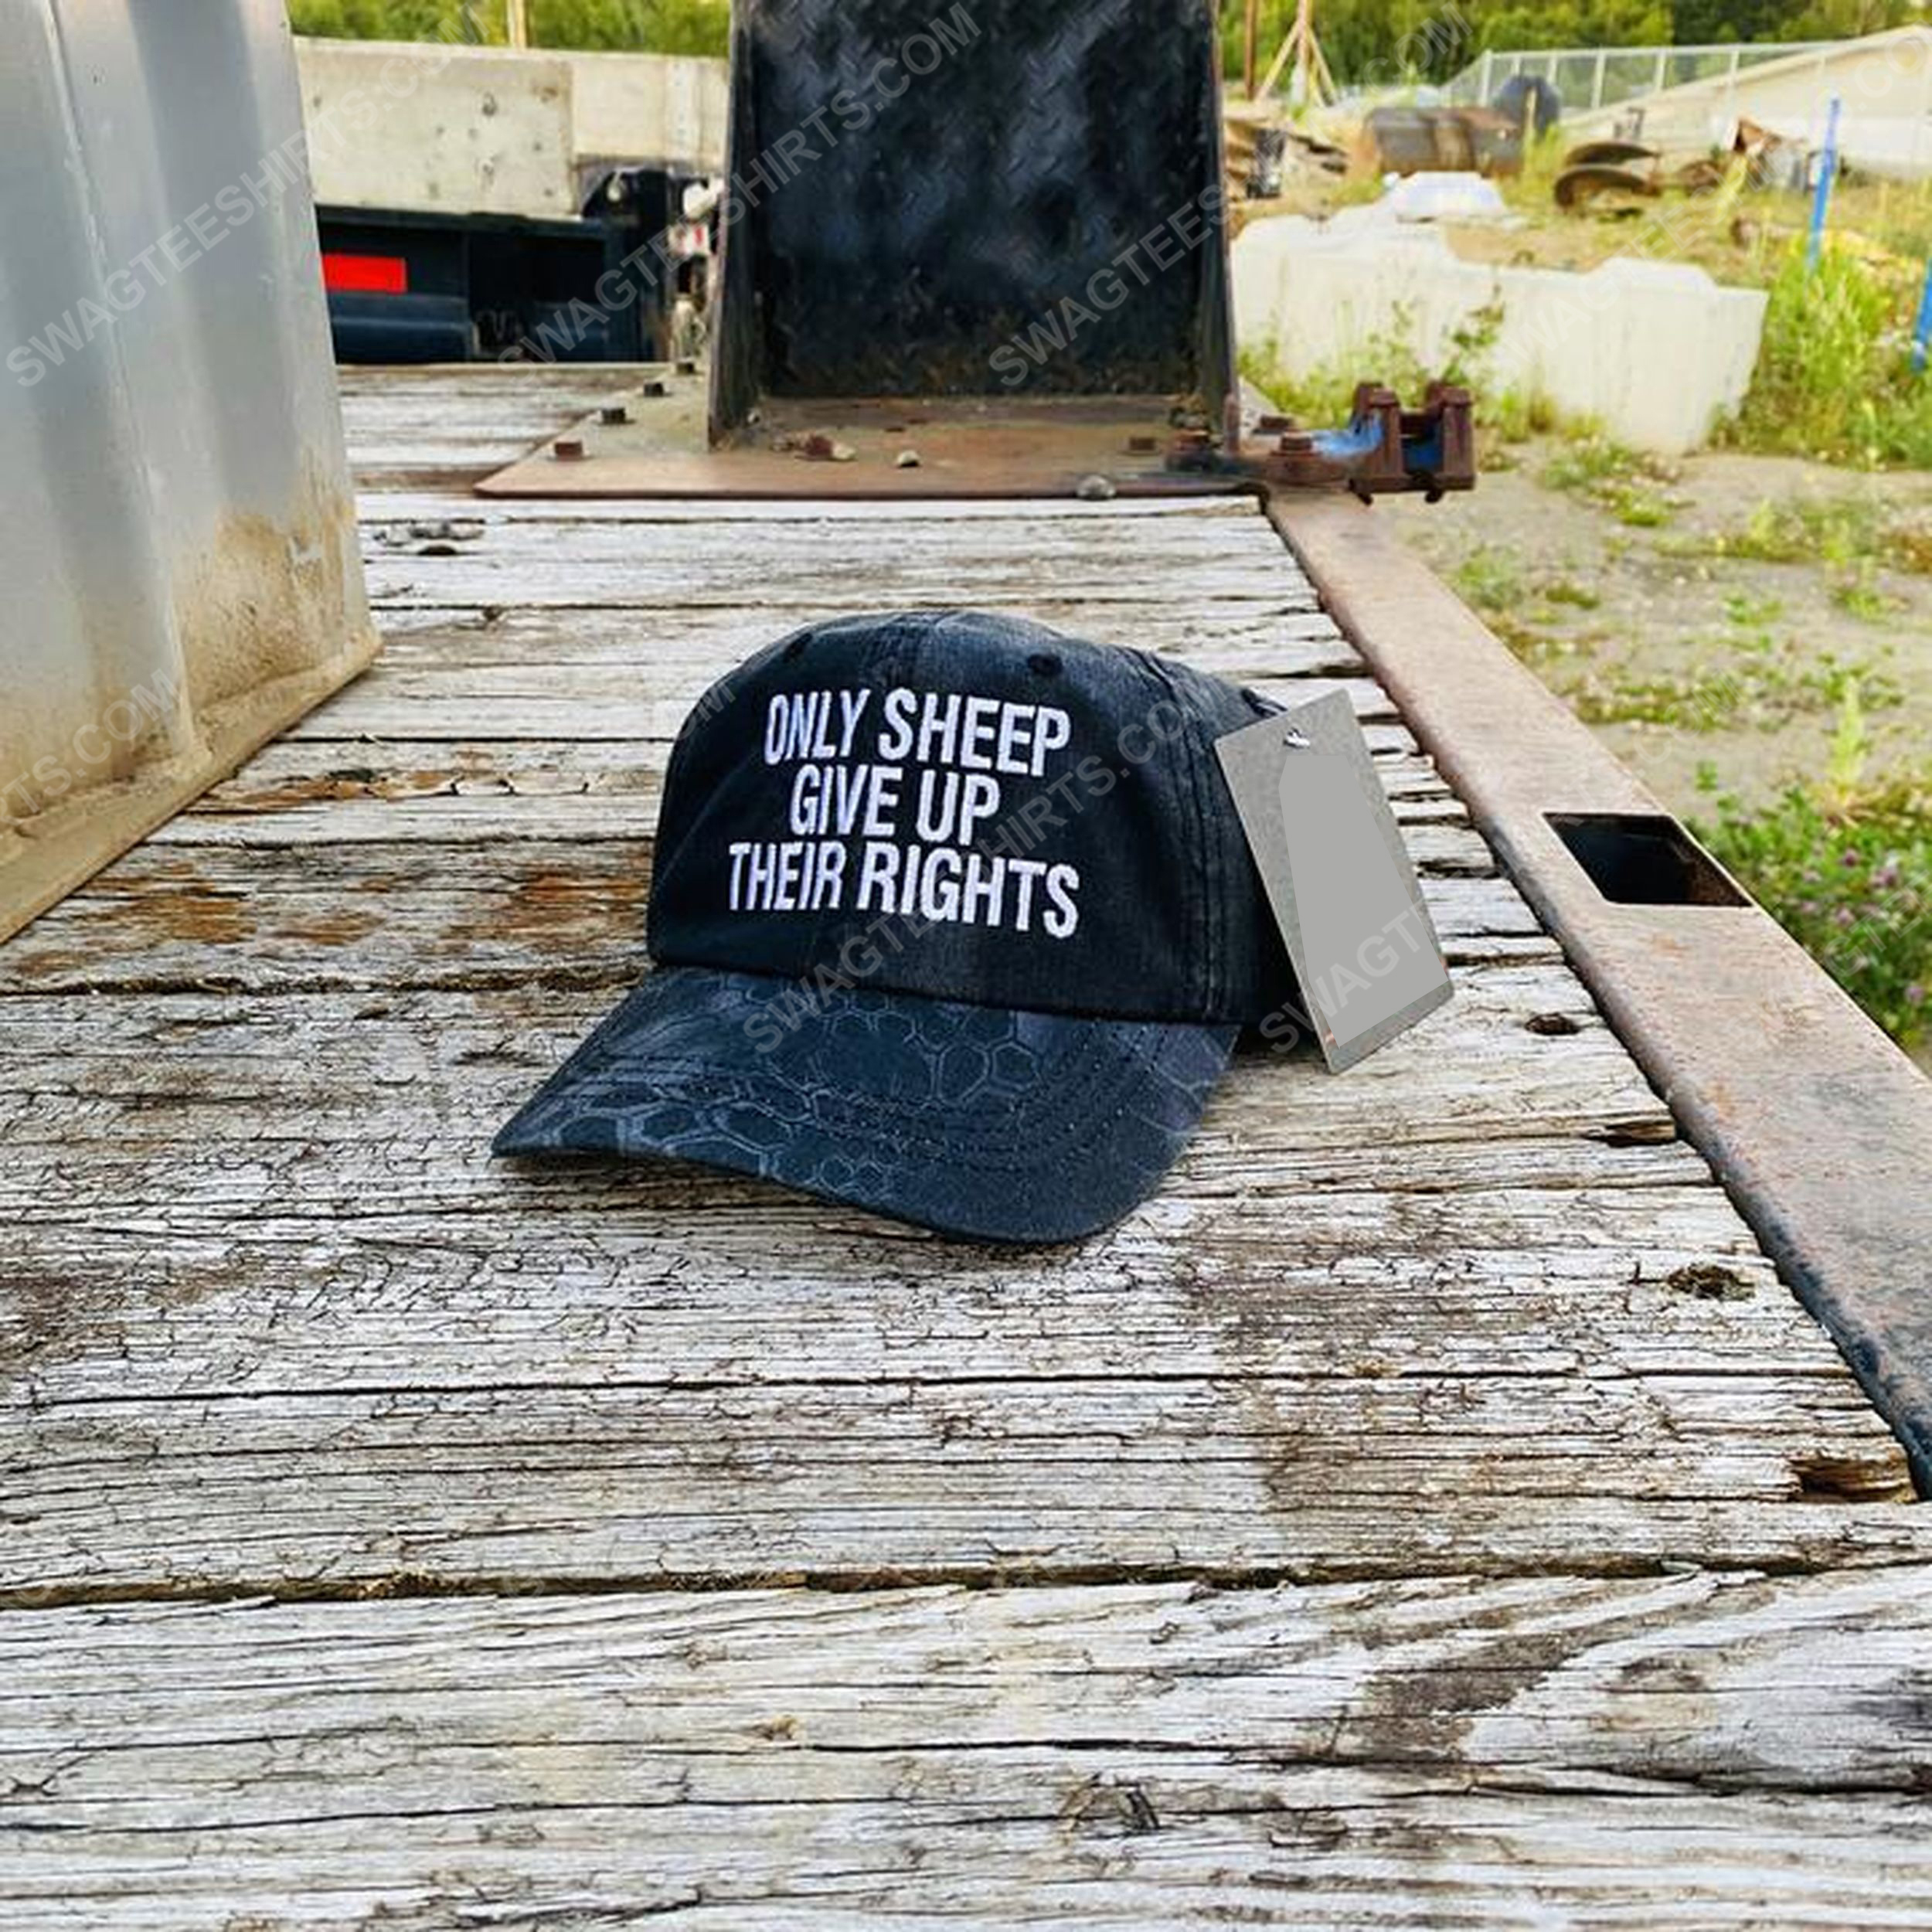 Only sheep give up their rights full print classic hat 1 - Copy (2)